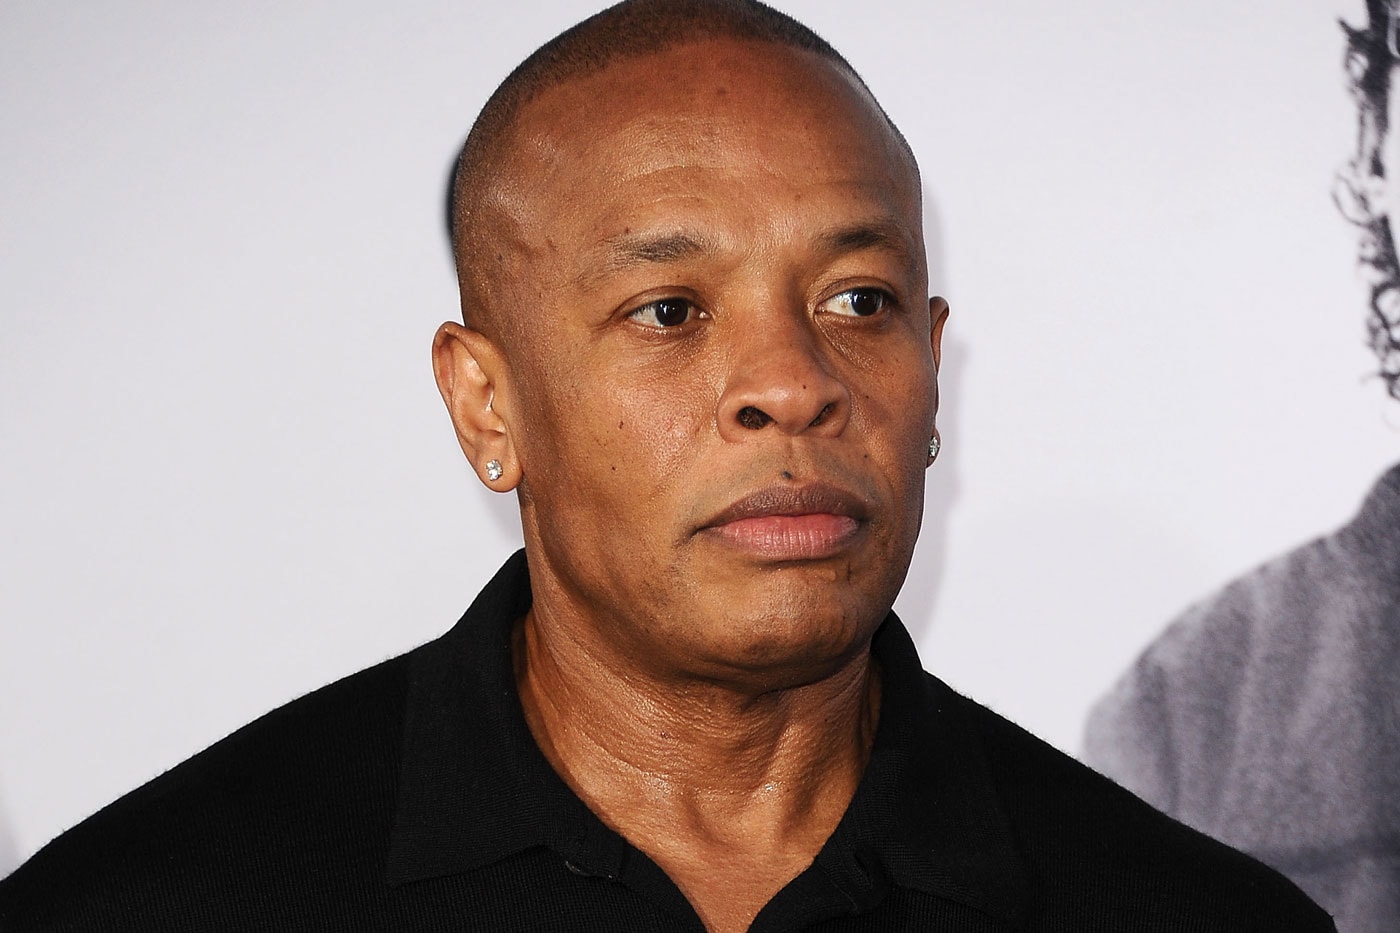 Dr. Dre's 'Compton' Debuts at No. 2 on Billboard